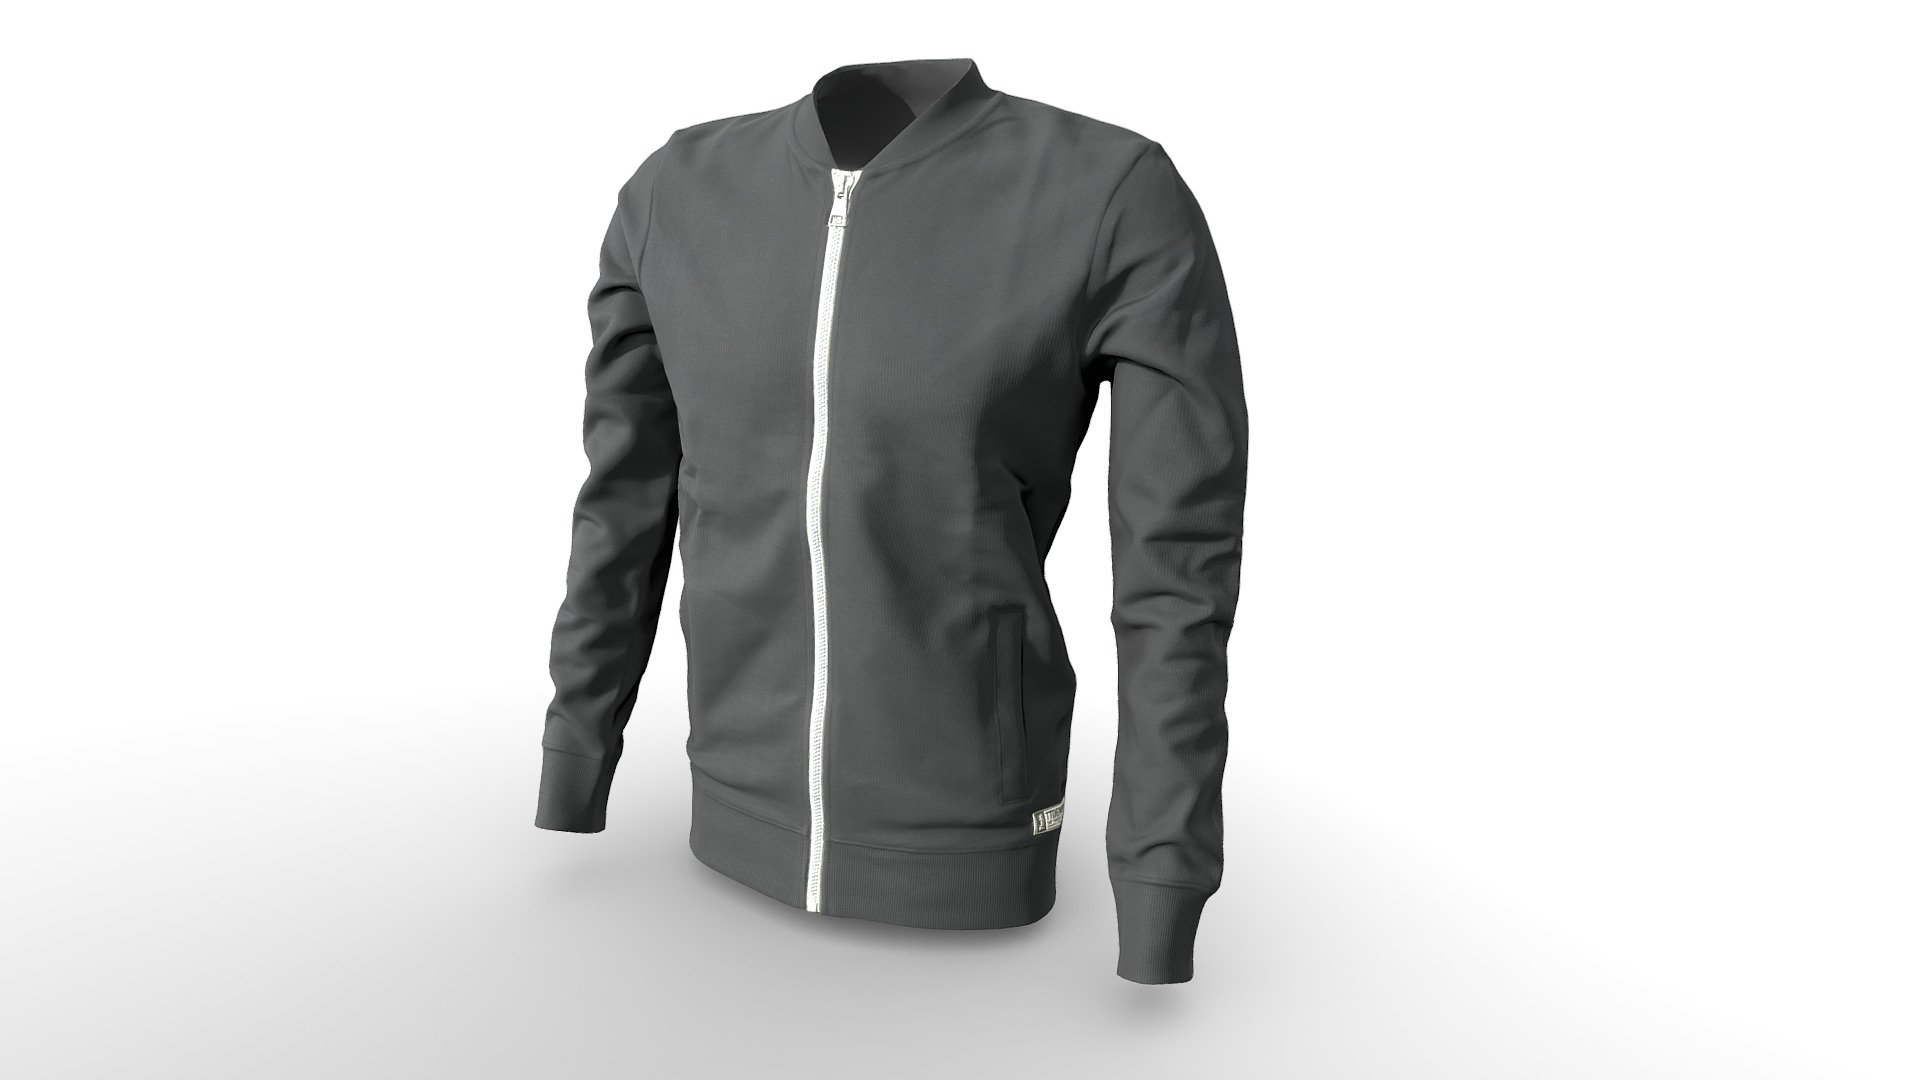 Realistic high detailed model of Zip-up Hoodie with high resolution textures. 
Model created by our unique semi-automatic scanning technology

Optimized for 3D web and AR / VR

=======FEATURES===========

The units of measurement during the creation process were milimeters.
Clean and optimized topology is used for maximum polygon efficiency. 
This model consists of 1 meshes. 
All objects have fully unwrapped UVs. 
The model has 2 materials 
Includes high detailed normal map

Includes High detail 4096x4096 .png textures (diffuse (base color), Roughness, Metallness, Normal) 
60k polygons - TOM TAILOR DENIM JACKET - Zip-up Hoodie - Buy Royalty Free 3D model by VRModelFactory 3d model